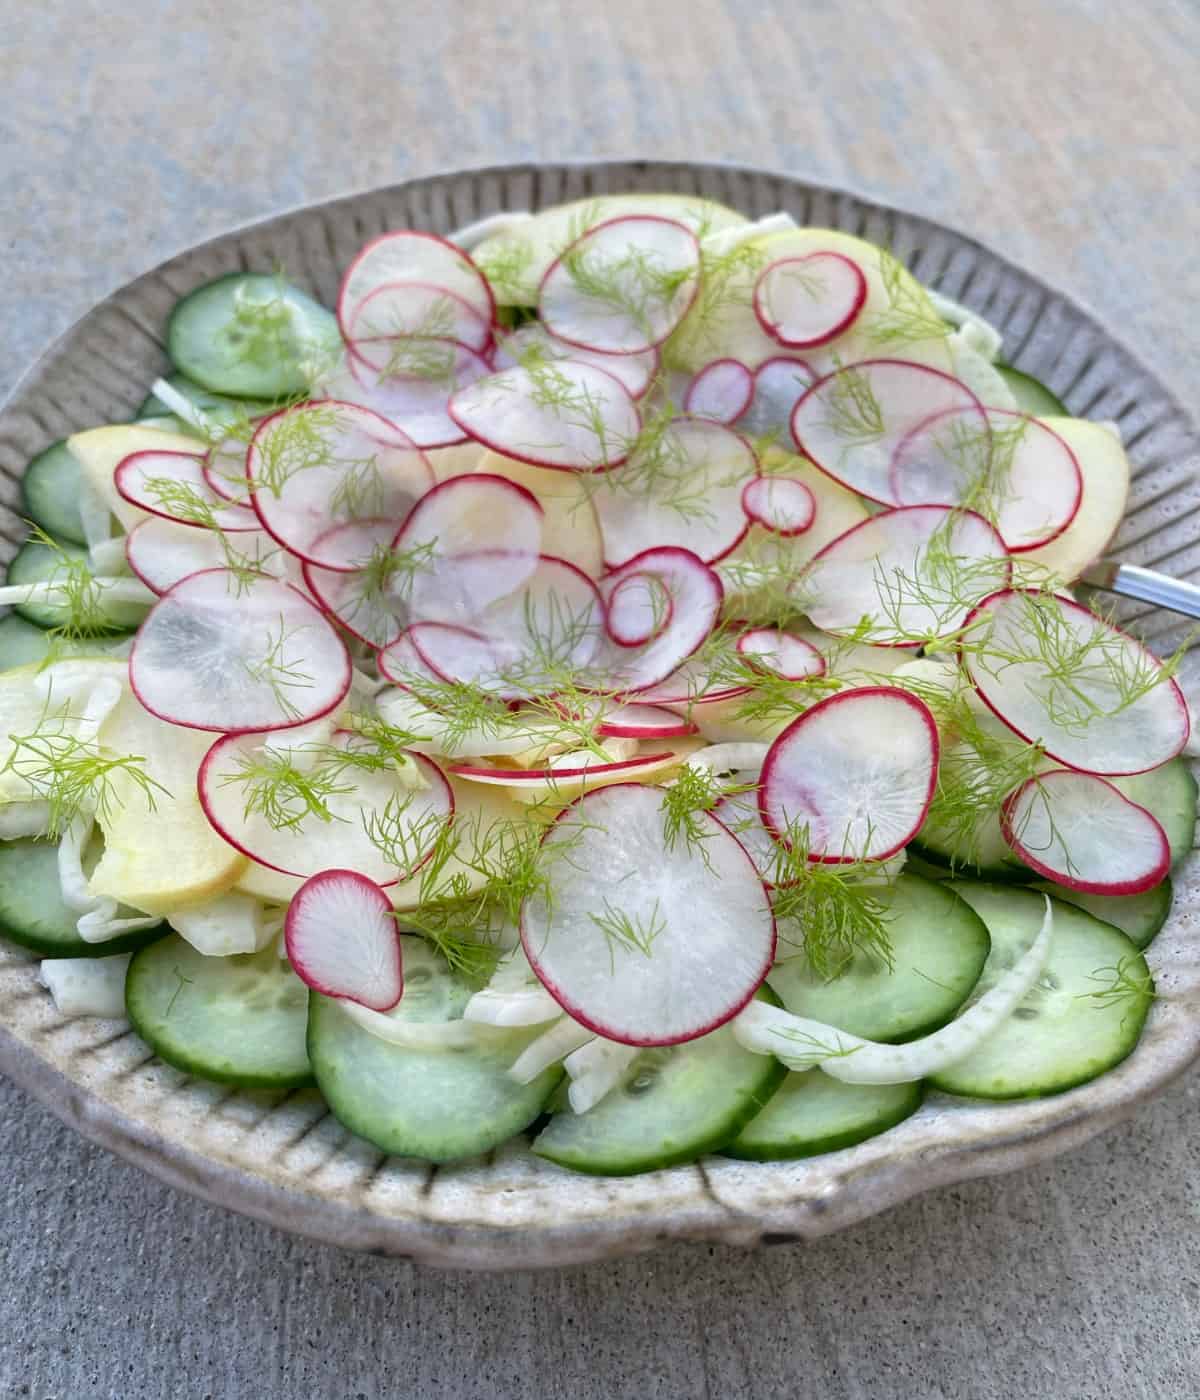 Radish Fennel Salad with sliced cucumber and Honeycrisp apple on serving dish with spoon.